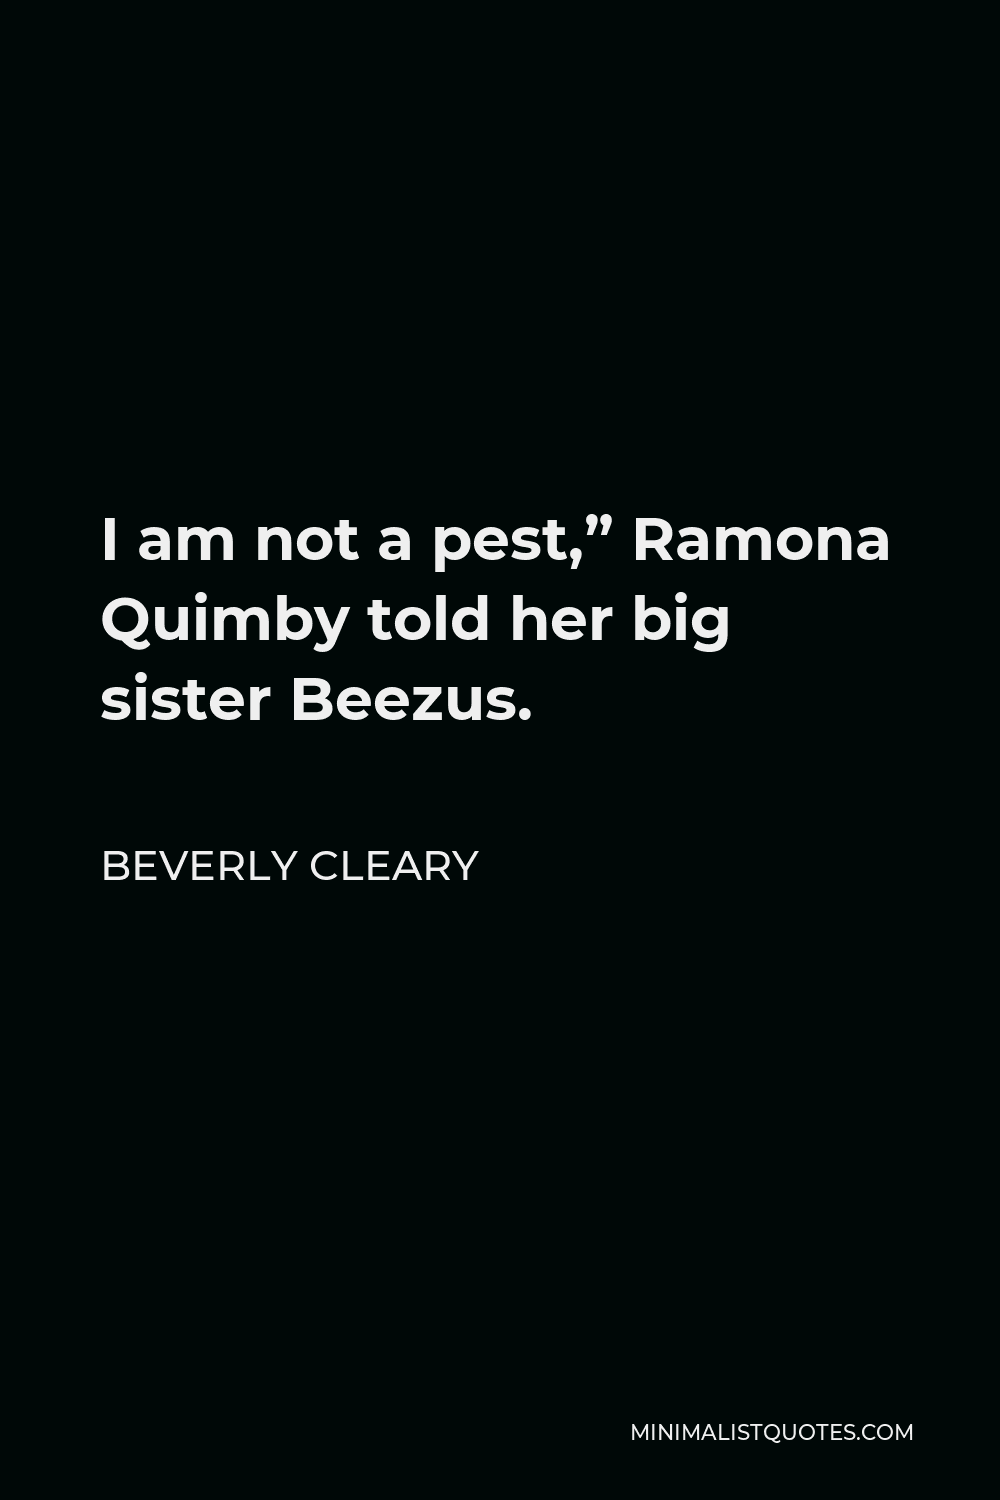 Beverly Cleary Quote - I am not a pest,” Ramona Quimby told her big sister Beezus.